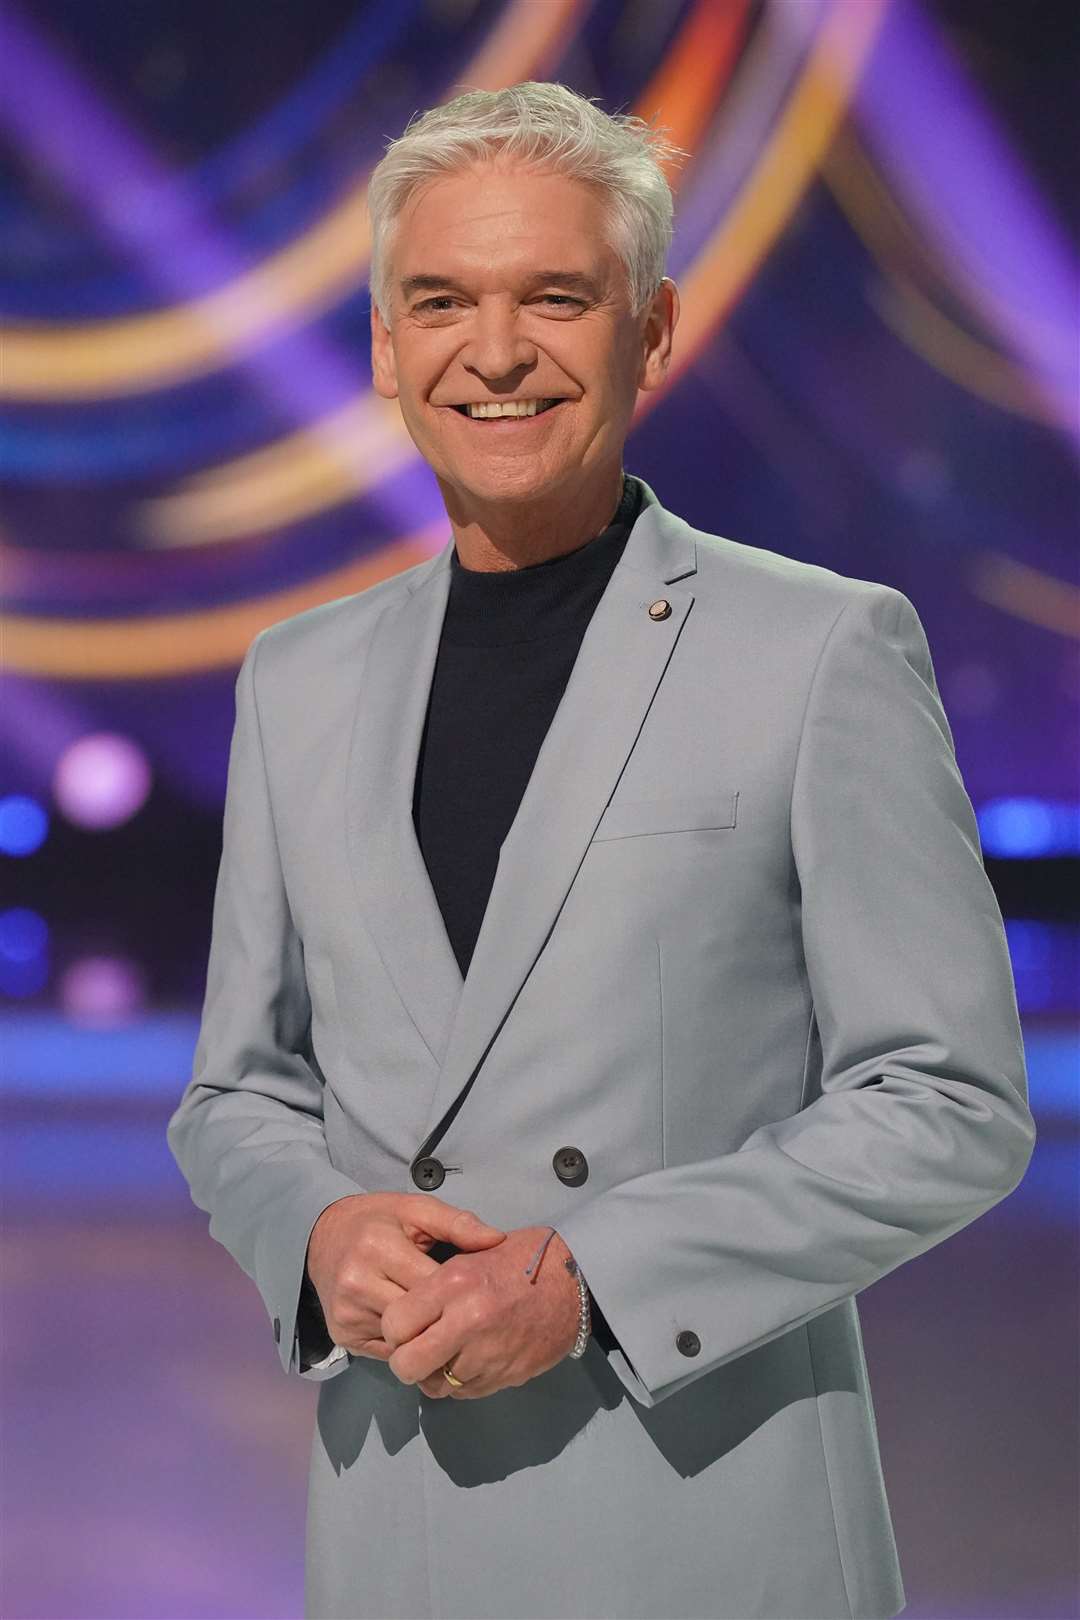 Phillip Schofield during a photo call for Dancing On Ice 2023 at the ITV Studios, Bovingdon Airfield, in Hemel Hempstead (Jonathan Brady/PA)